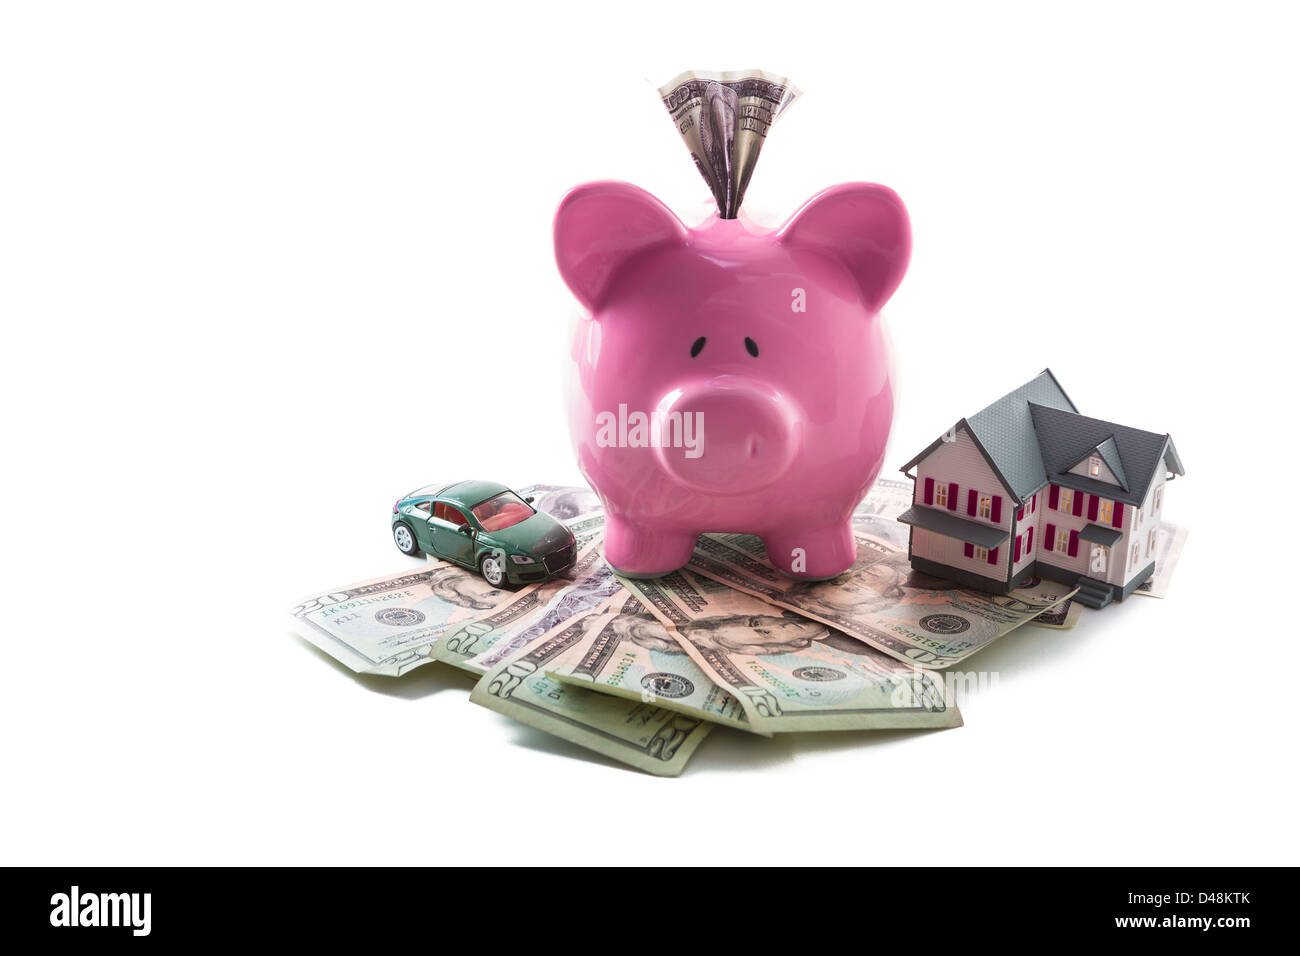 Piggy bank and toy car resting on pile of dollars with mini house Stock Photo